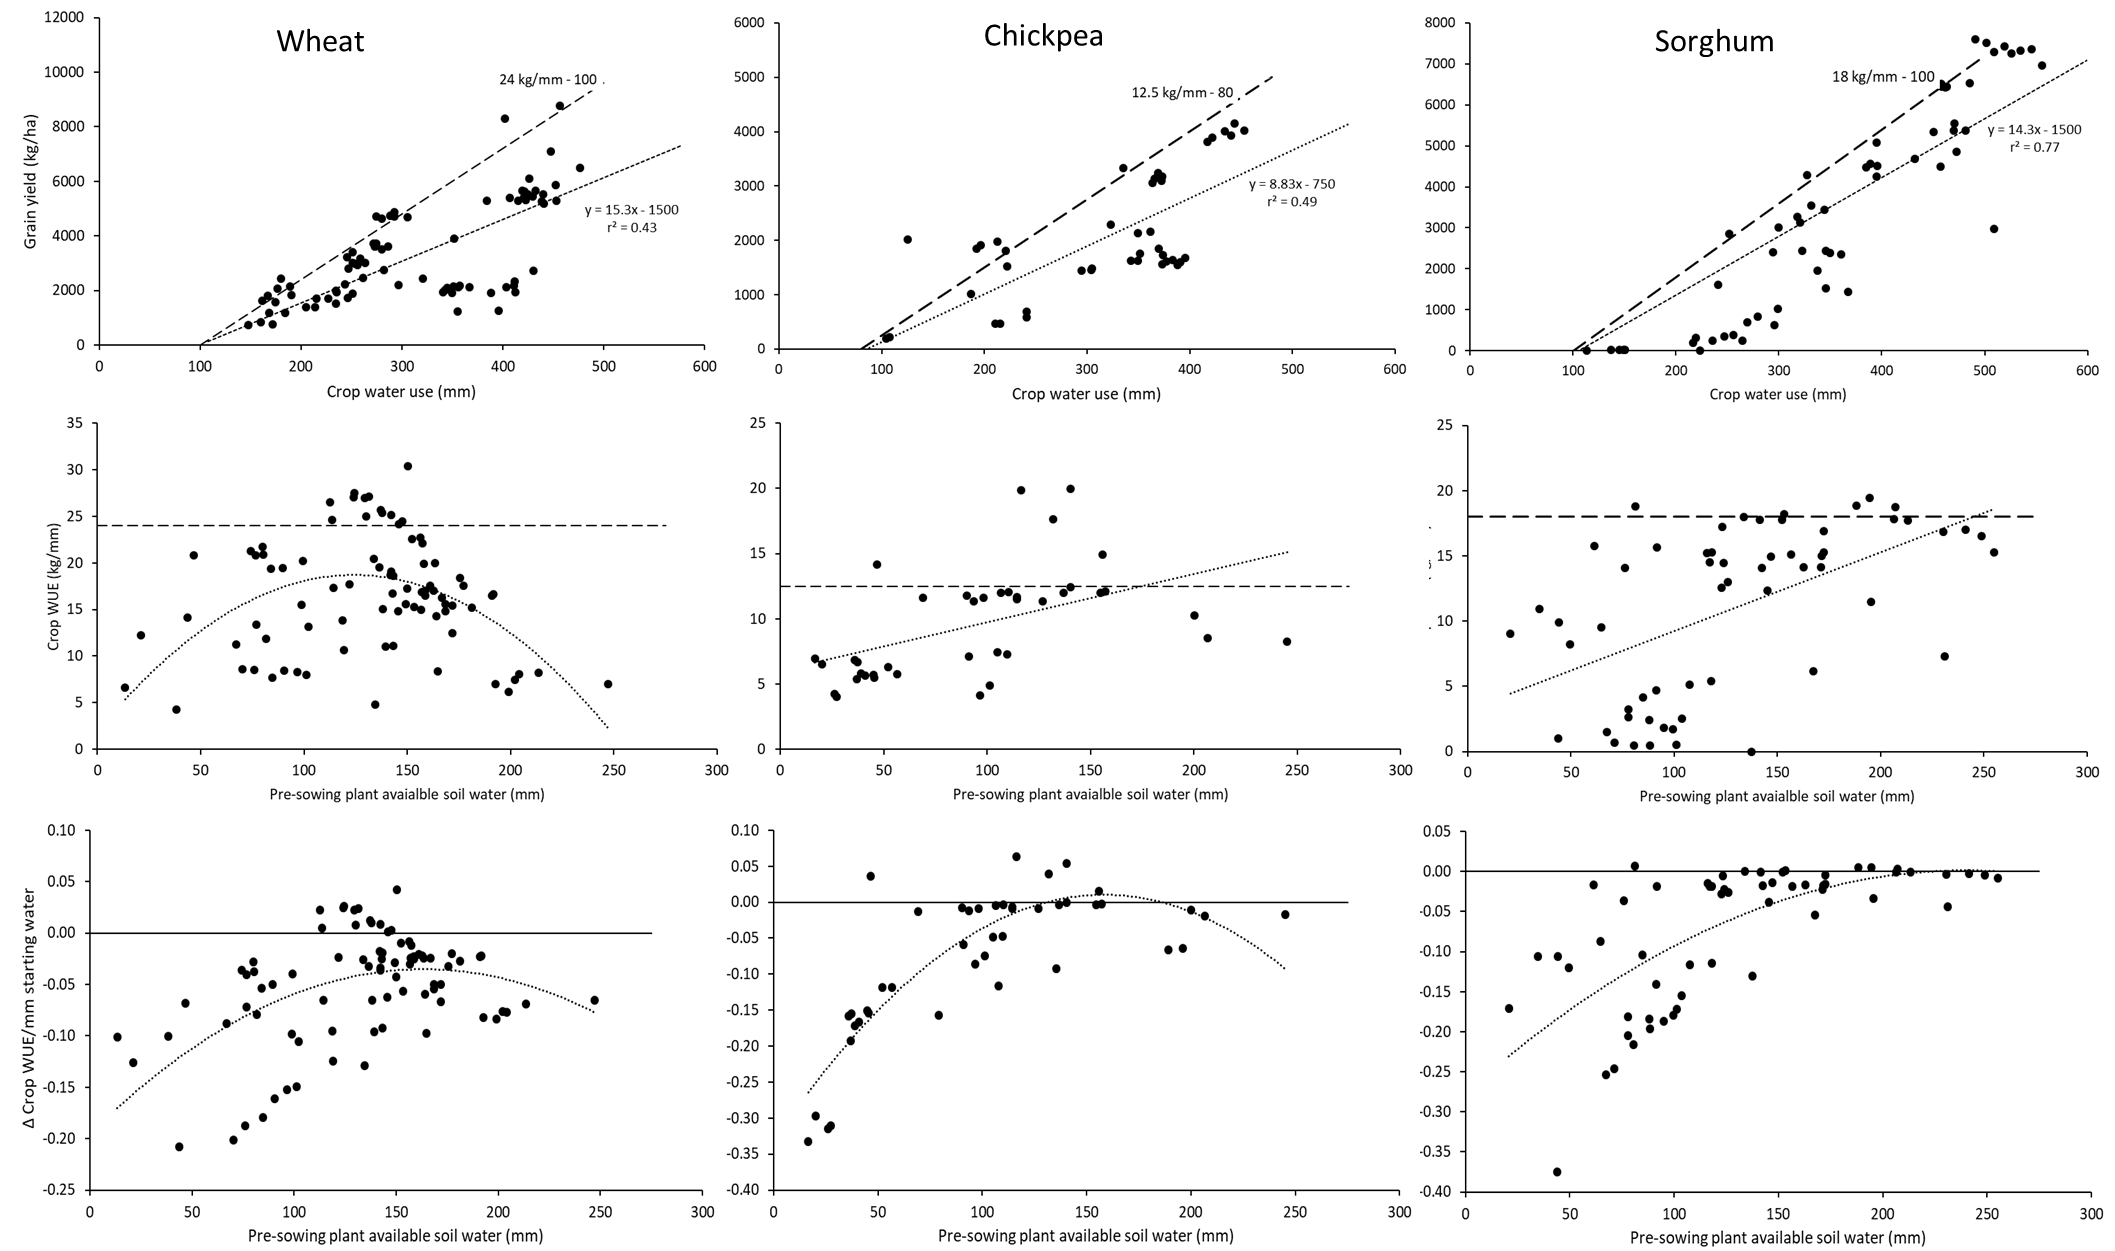 This series of nine scatter graphs with line of best fit show the relationships between water availability and crop yield and water use efficiency (WUE) in wheat, chickpea and grain sorghum collated from data collected across farming systems research sites. TOP –Crop water use (change in soil water plus rainfall) vs. grain yield, showing the maximum potential (dashed line) and the average across the dataset (dotted line); MIDDLE – Plant available soil water prior to planting vs. crop WUE (as calculated above); and BOTTOM – Plant-available soil water prior to planting vs the difference between the measured crop WUE and the potential WUE per mm of additional water available (dashed lines in above figures).